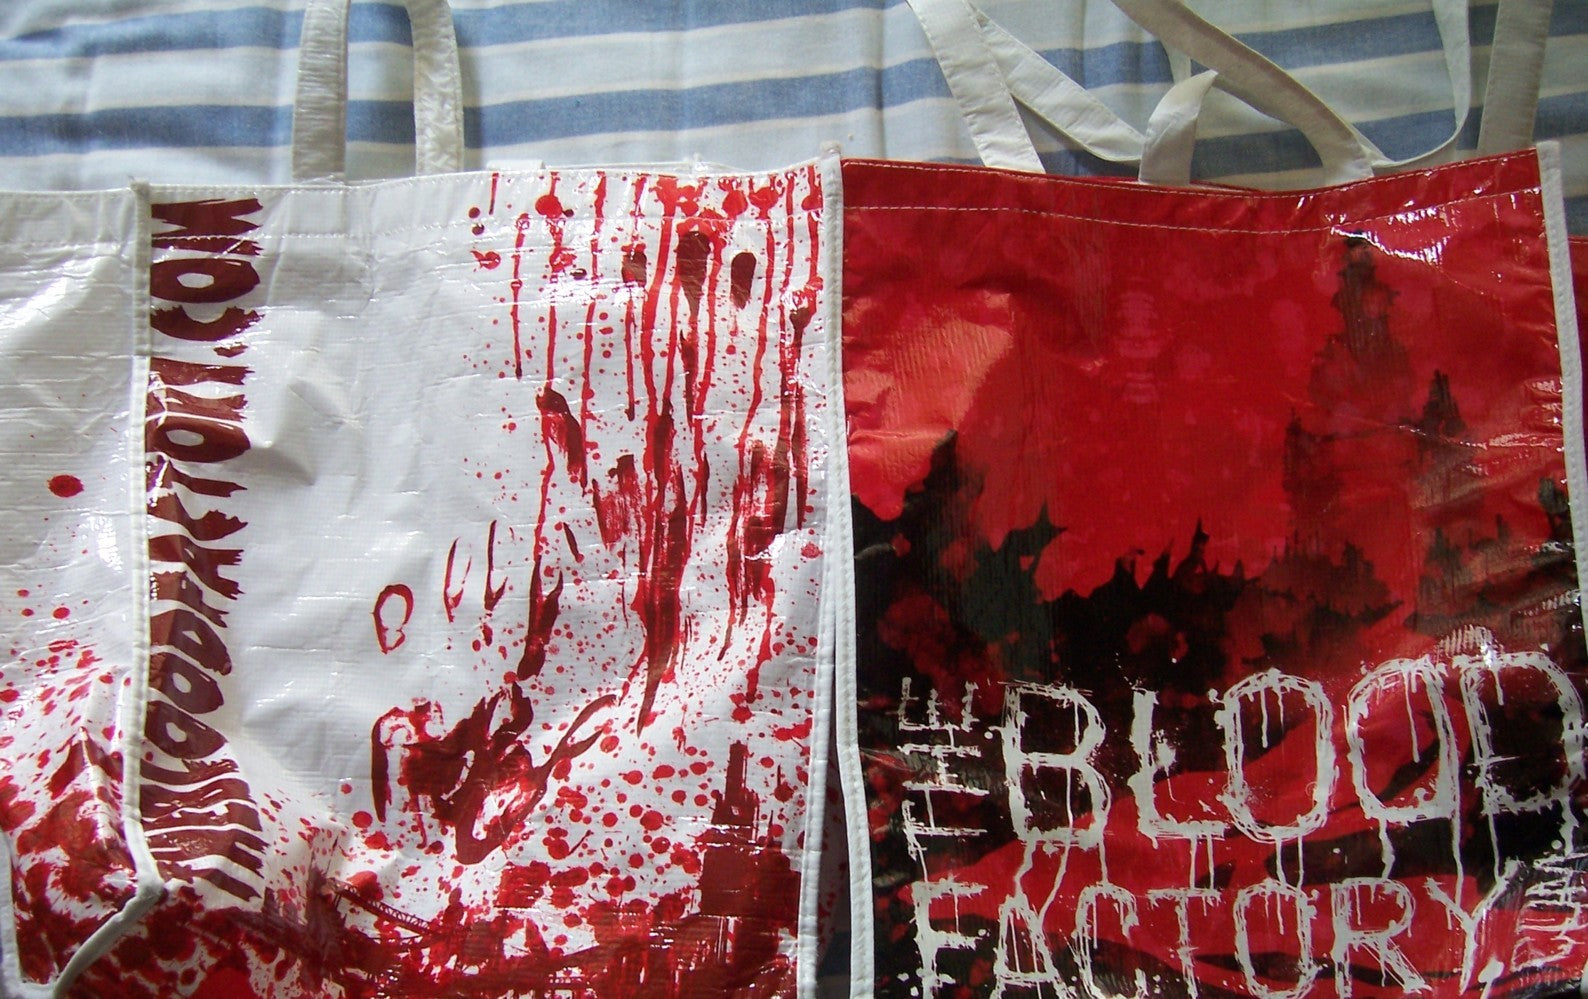 Blood Factory 2009 and 2010 Comic-Con promo tote bags